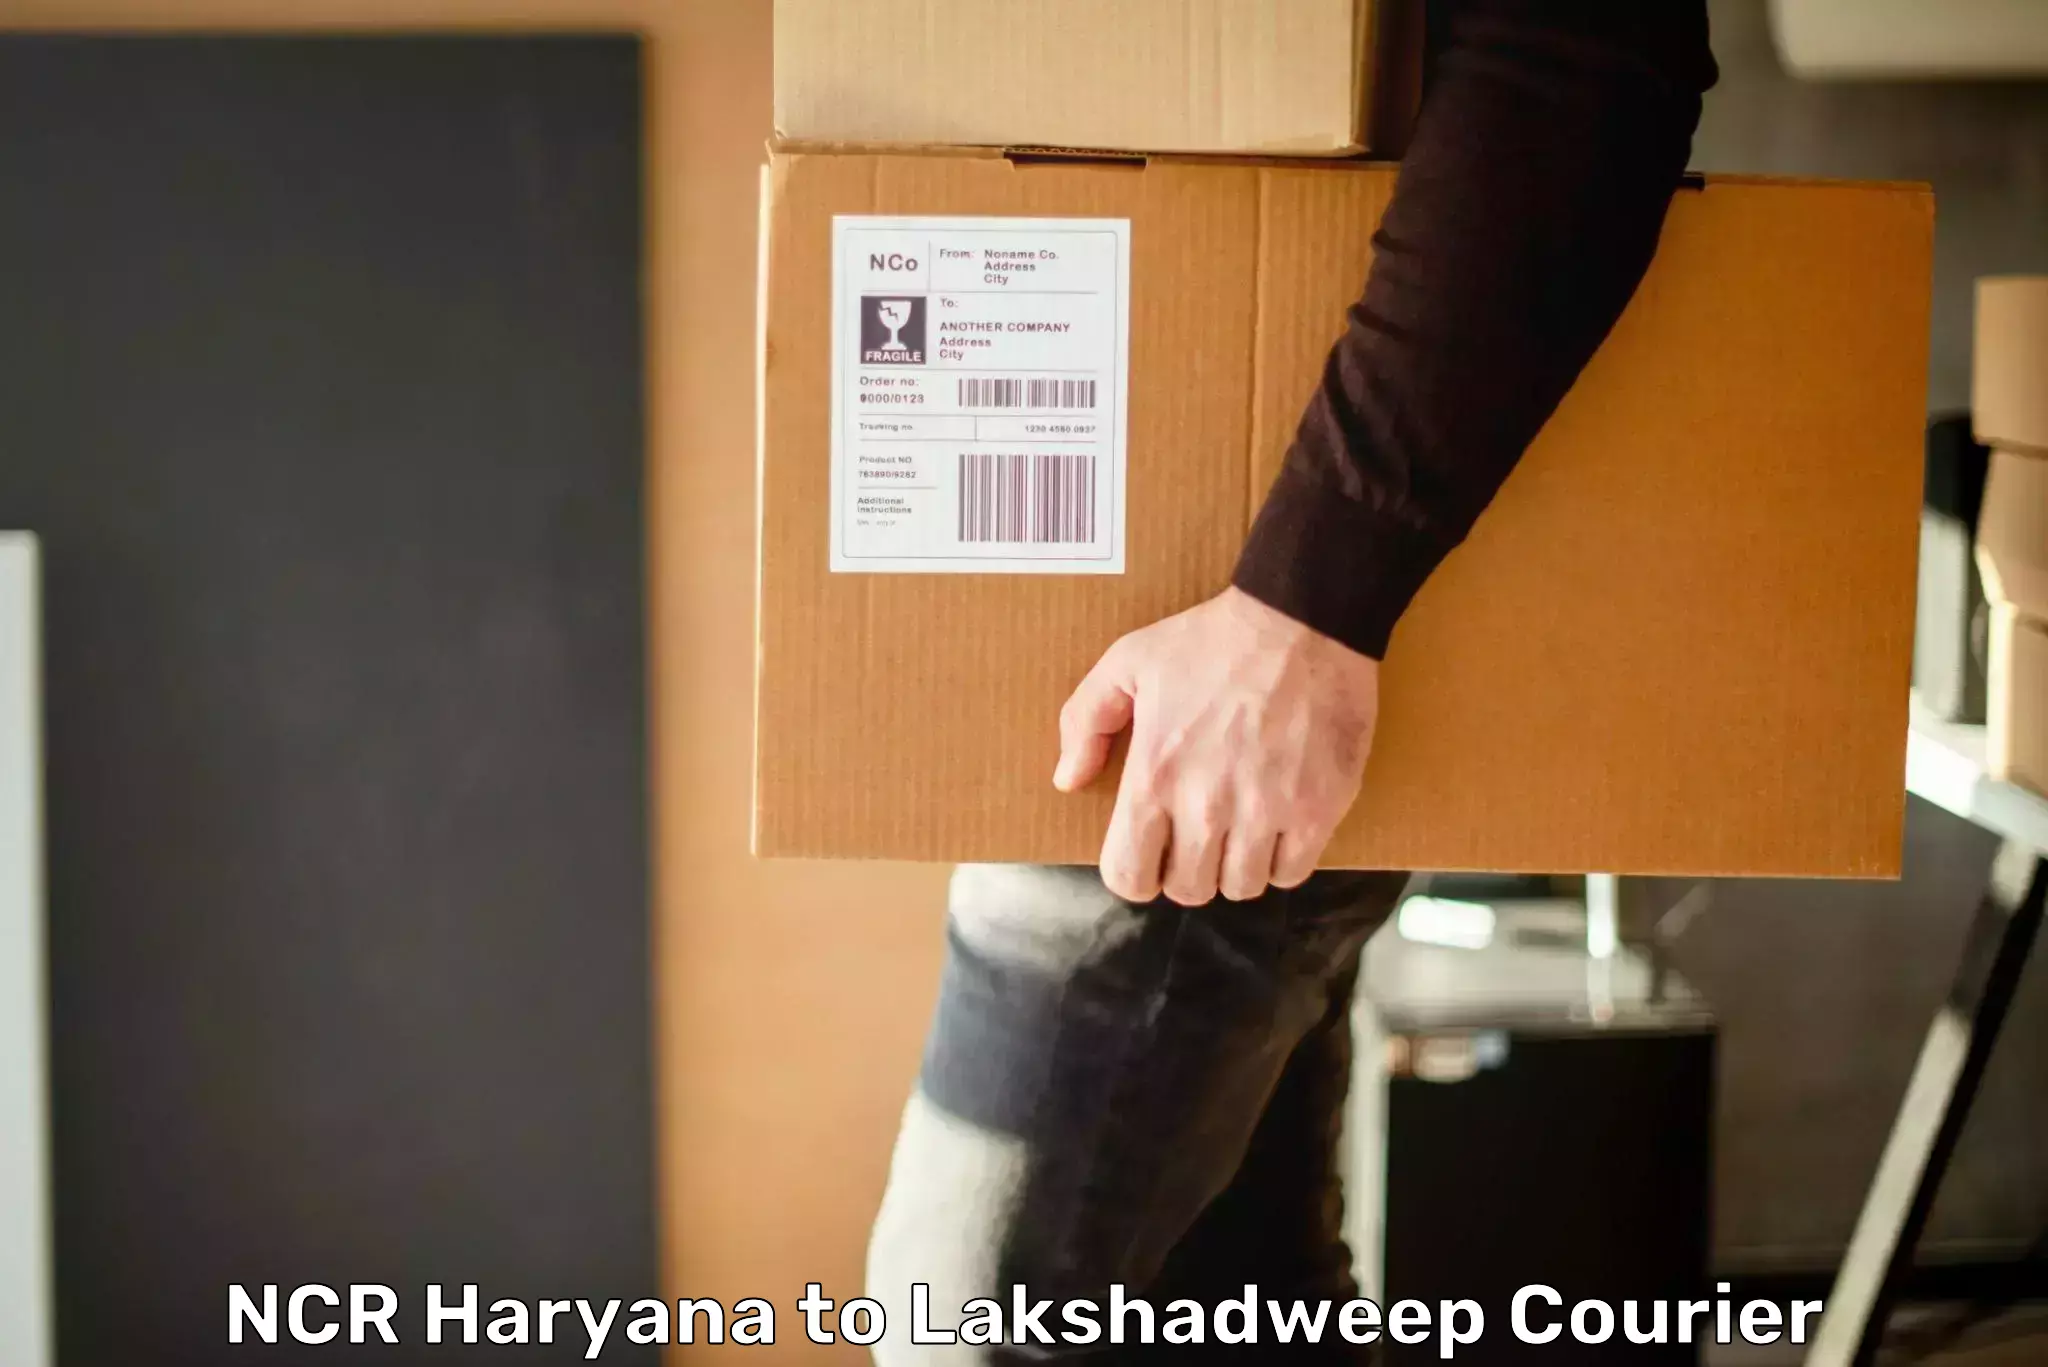 Courier service innovation NCR Haryana to Lakshadweep